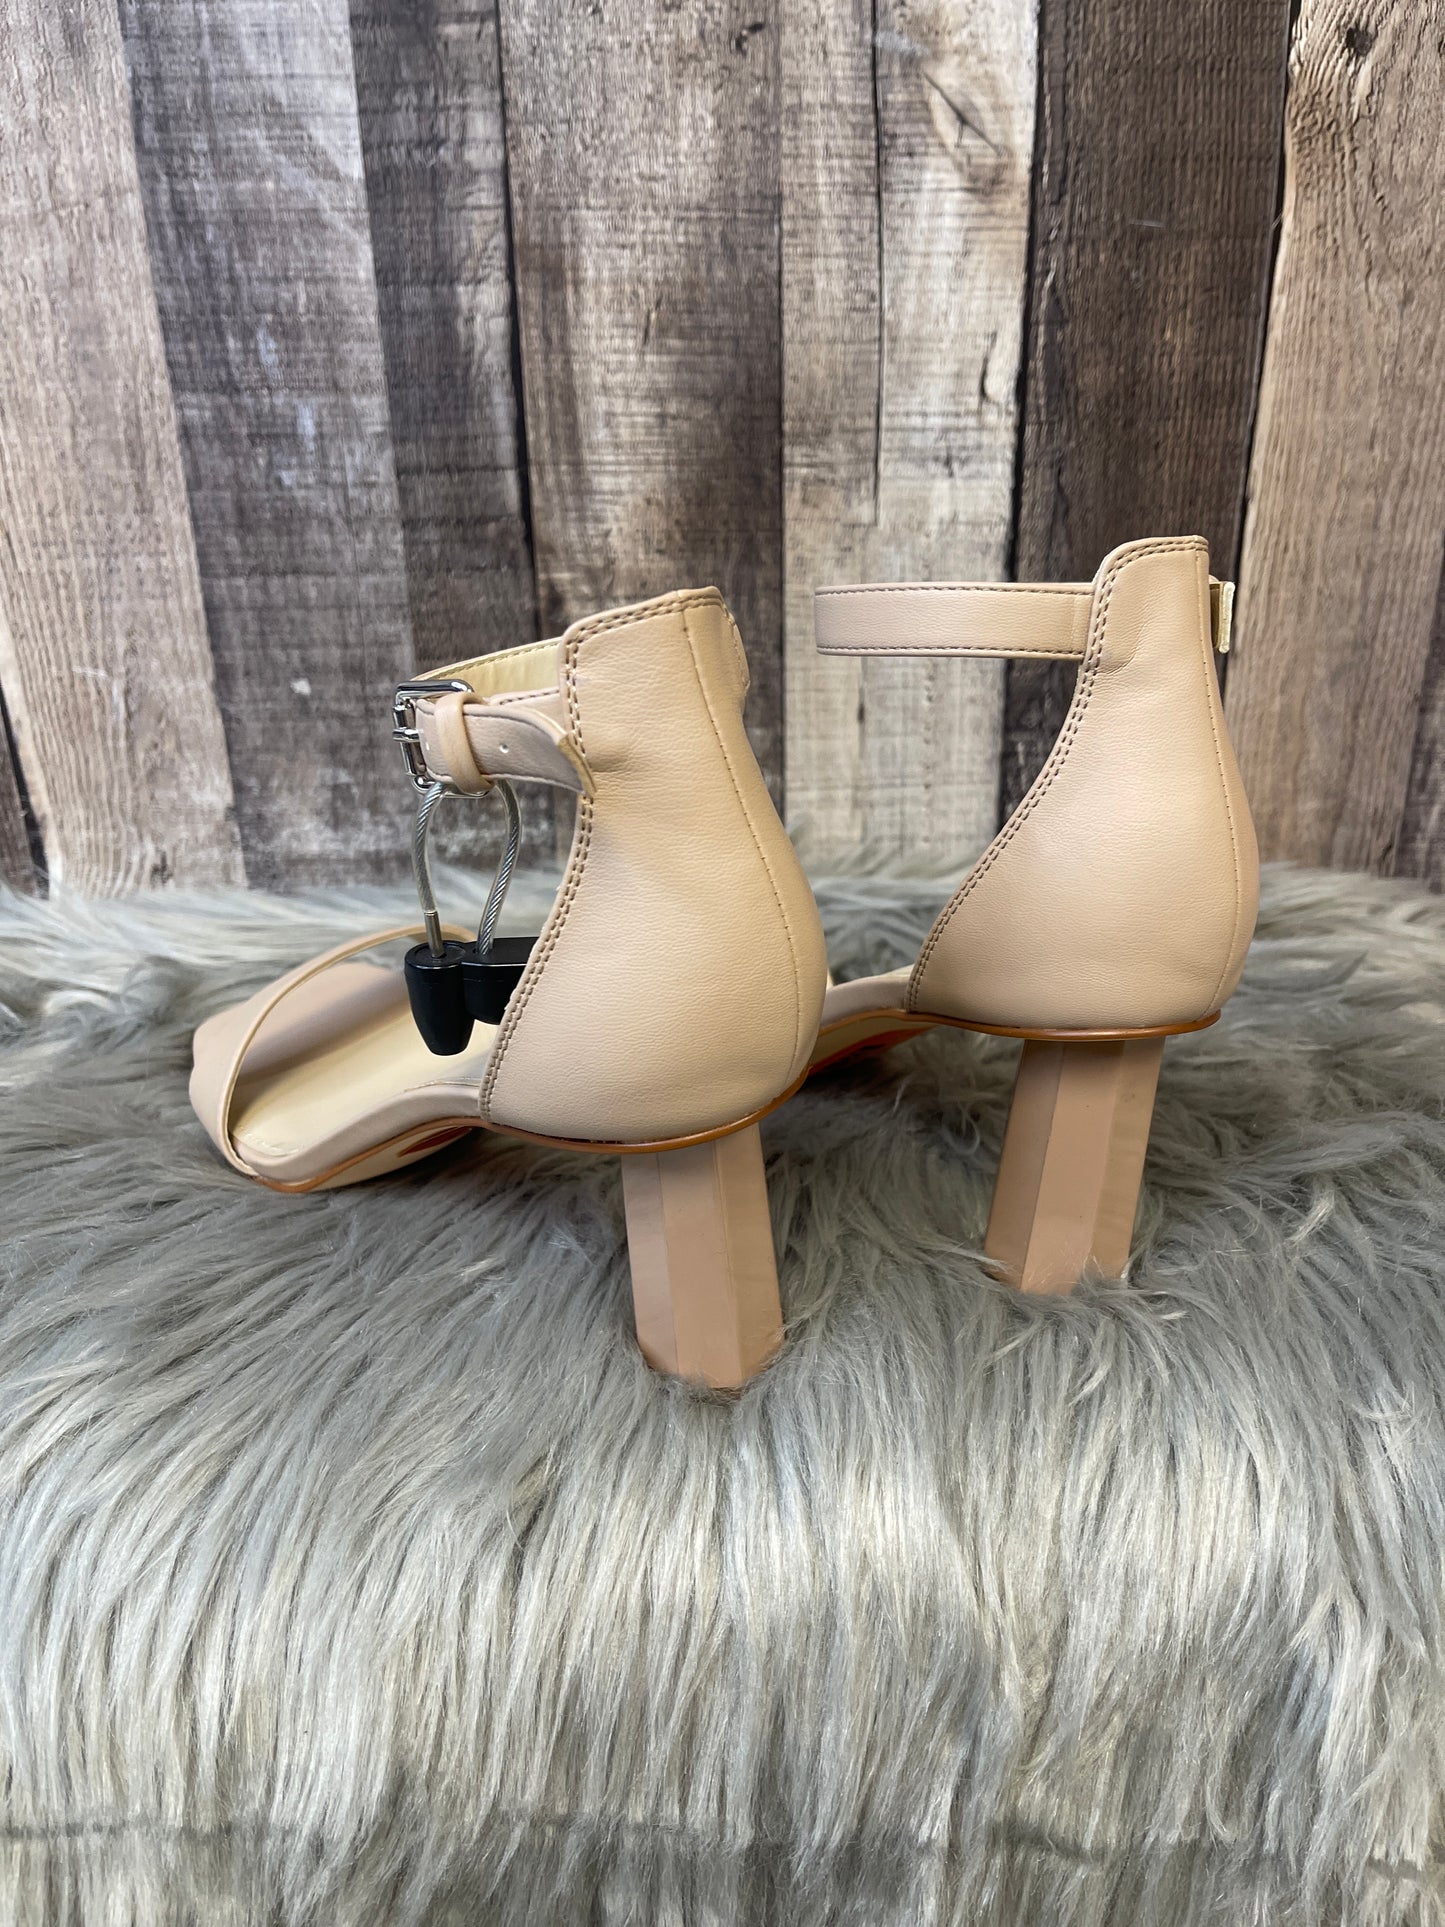 Sandals Heels Block By Marc Fisher  Size: 8.5